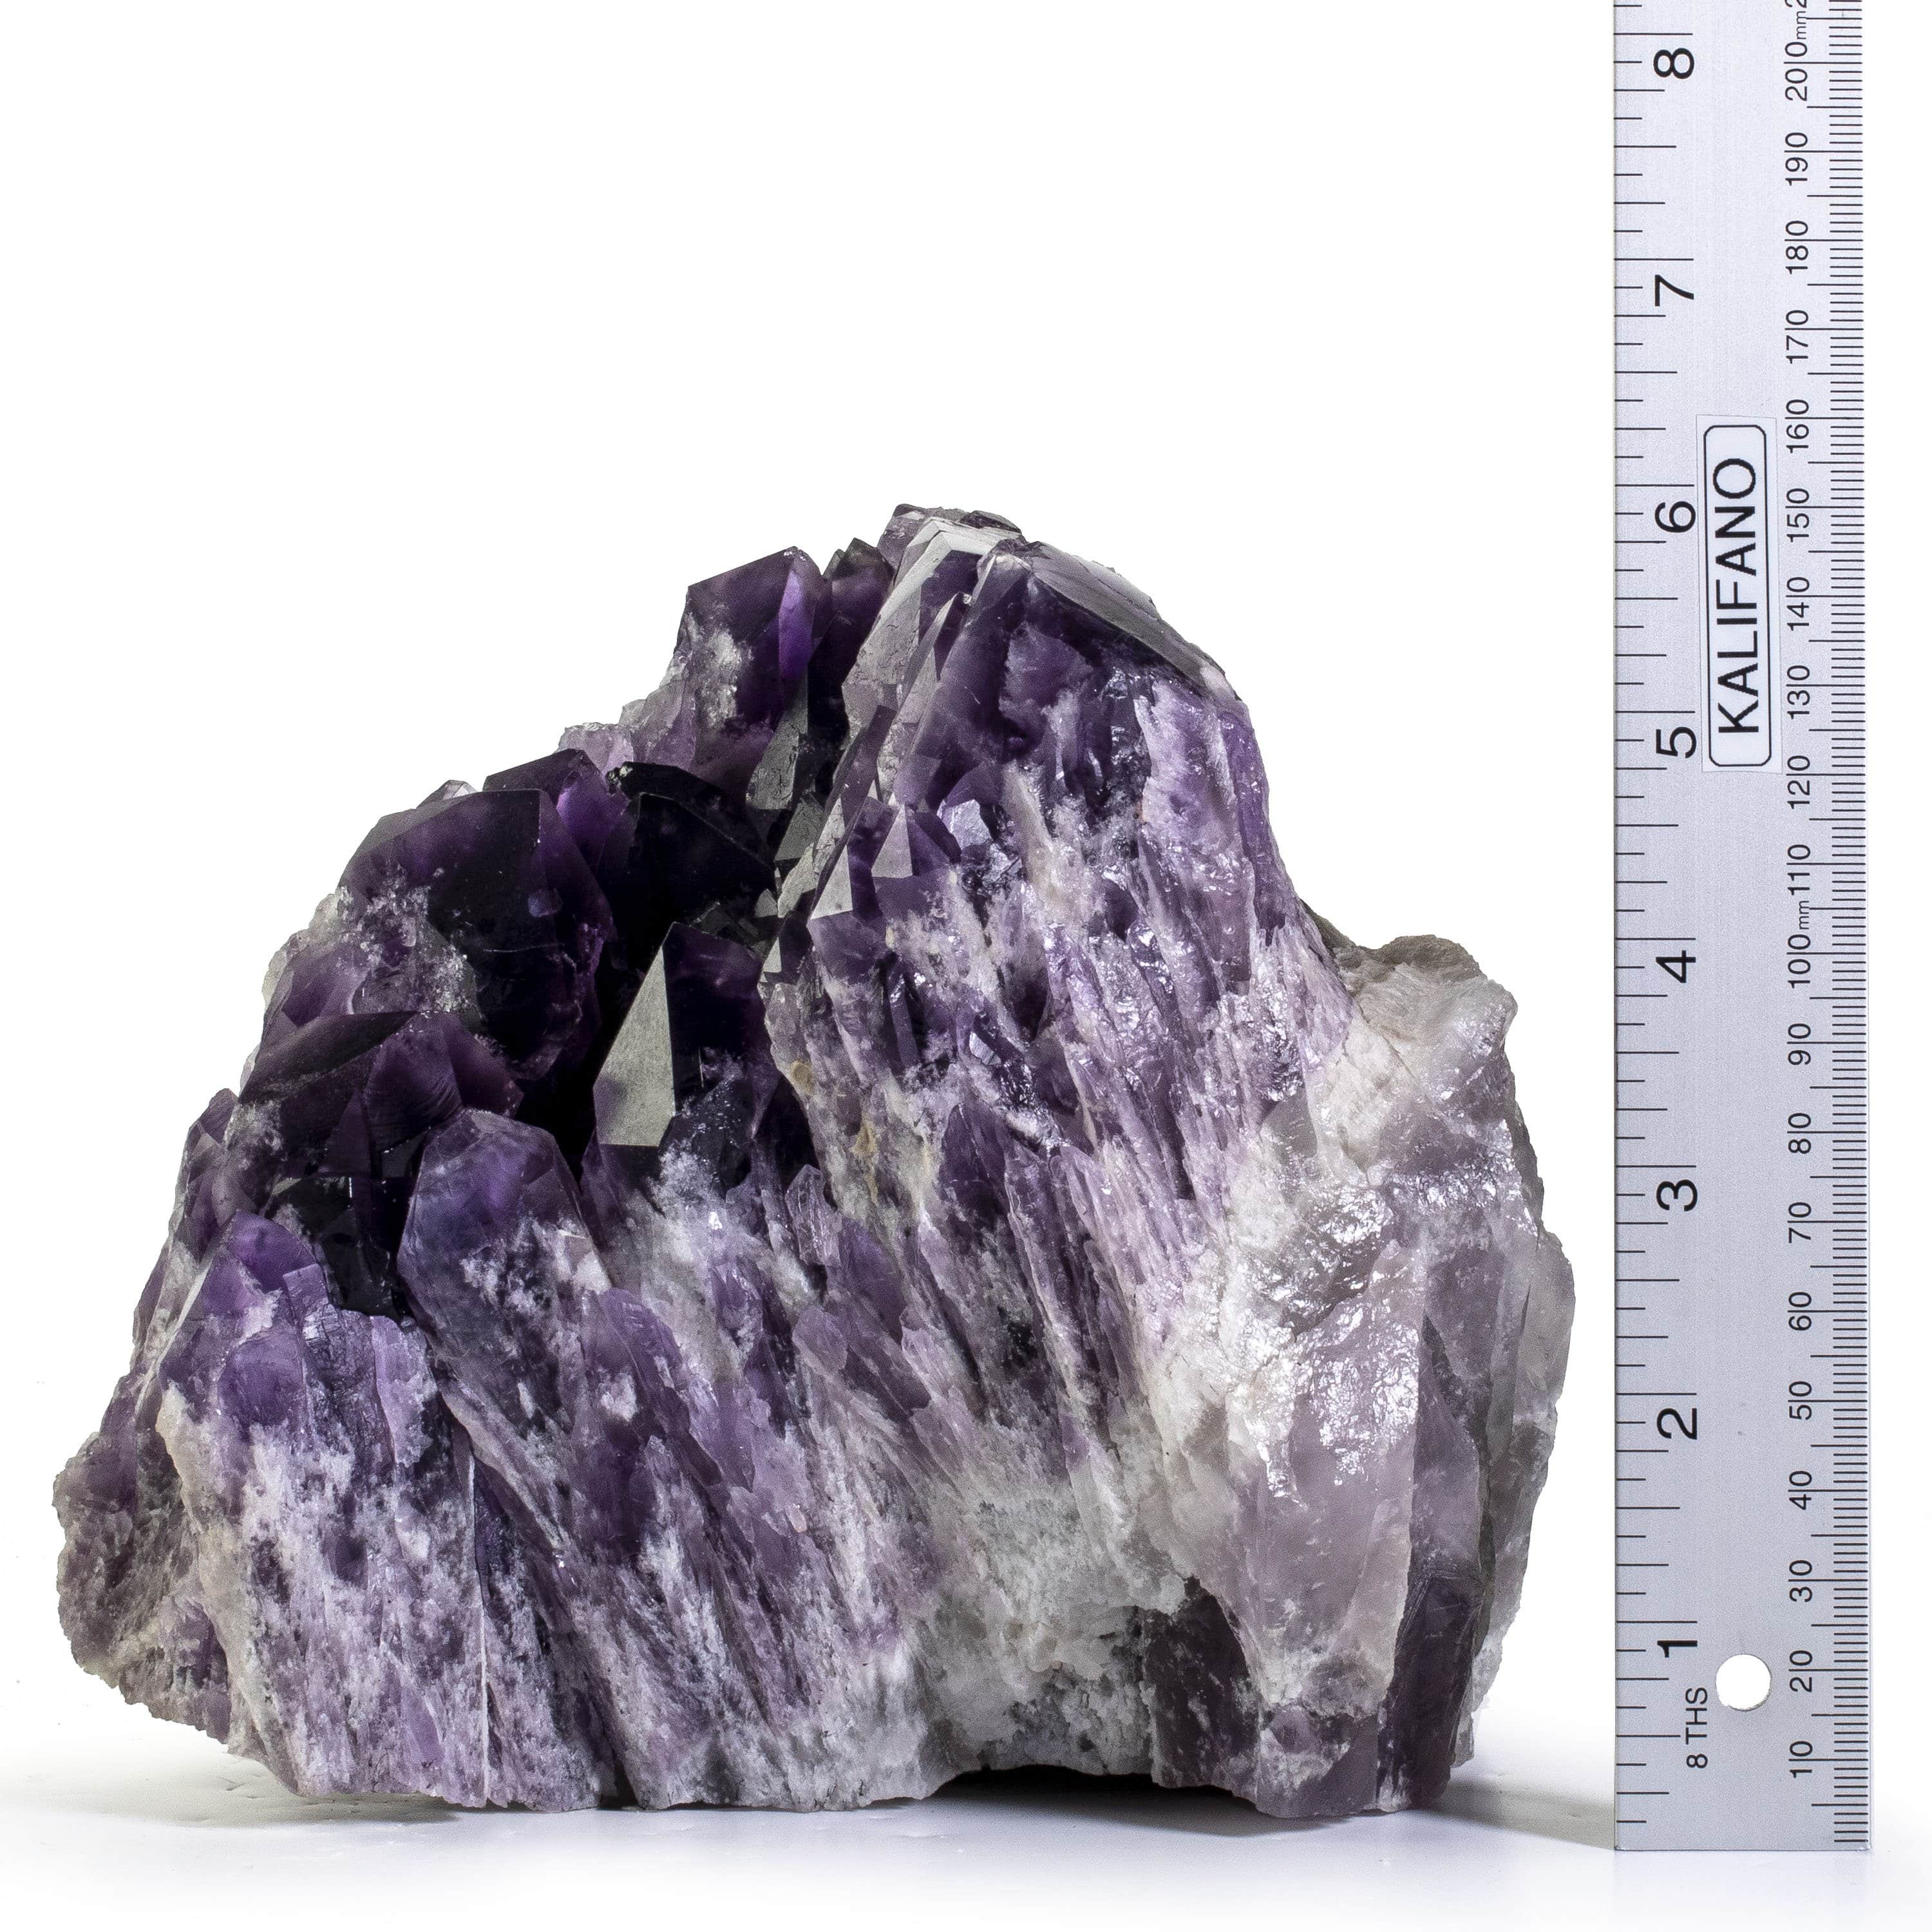 Kalifano Amethyst Rare Natural Elestial Amethyst Cluster Point from Brazil - 11.2 lbs ALW2000.001